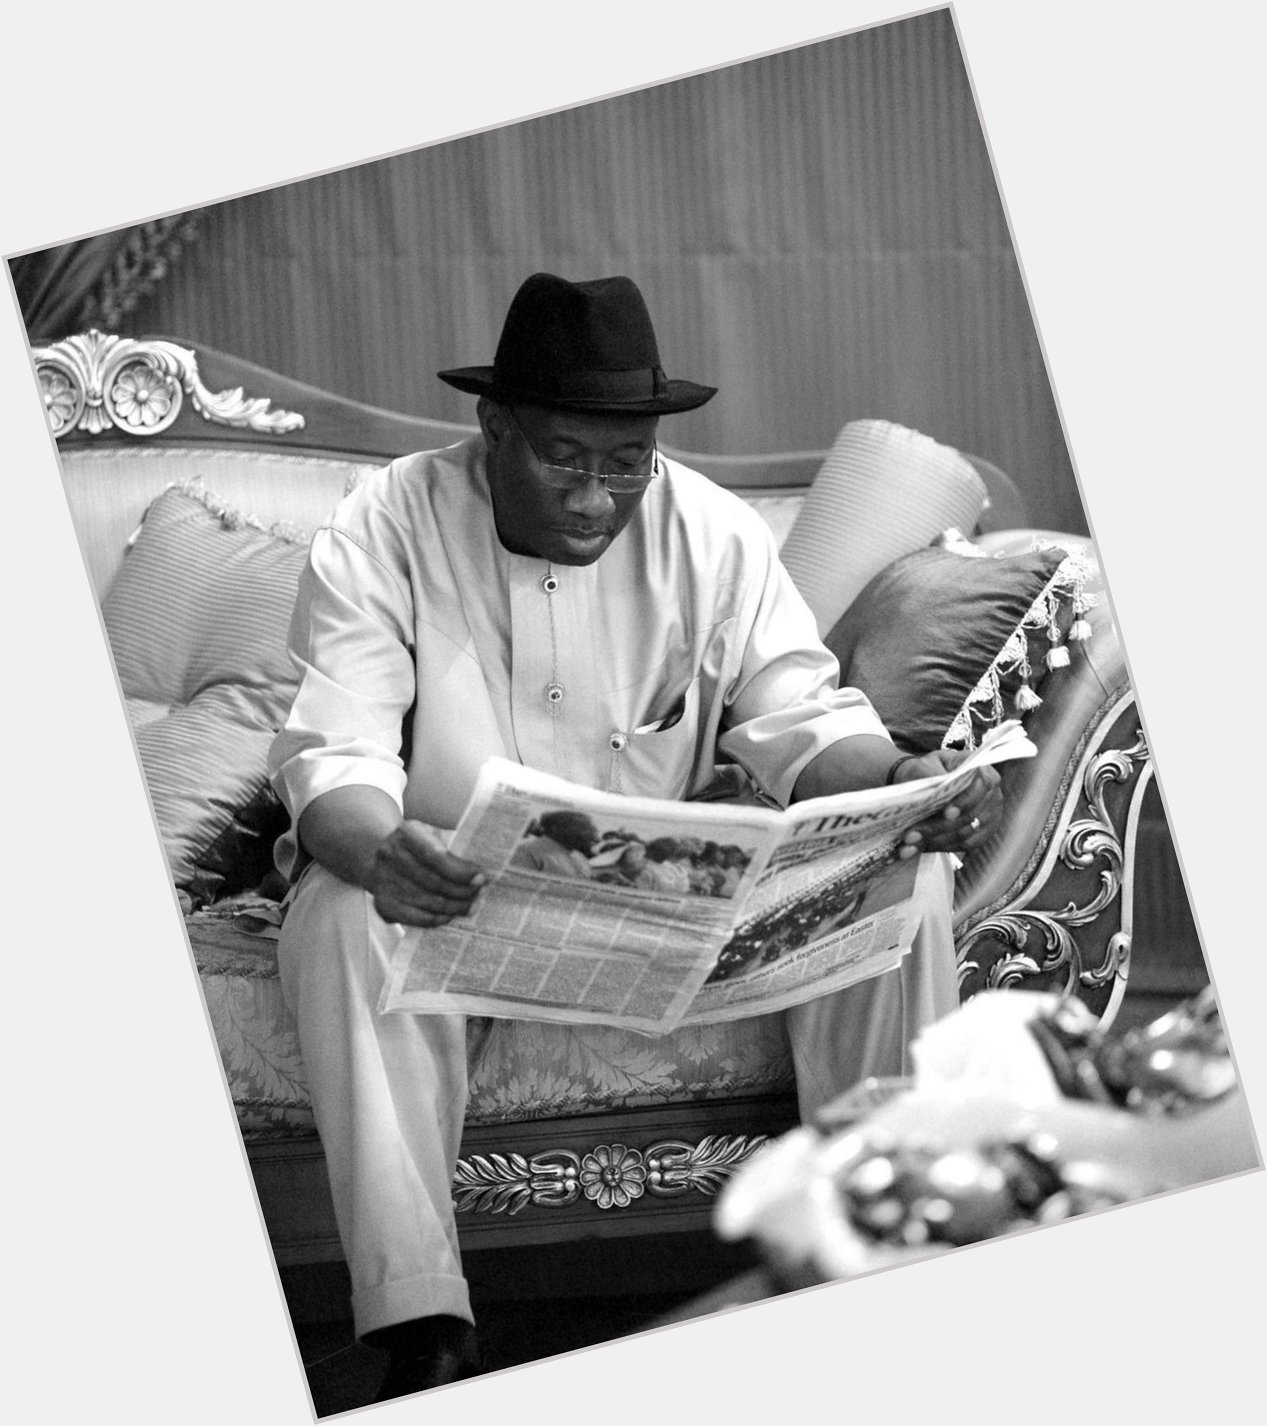 A very happy 63rd birthday to Dr Goodluck Jonathan, our former president and a great patriot. 